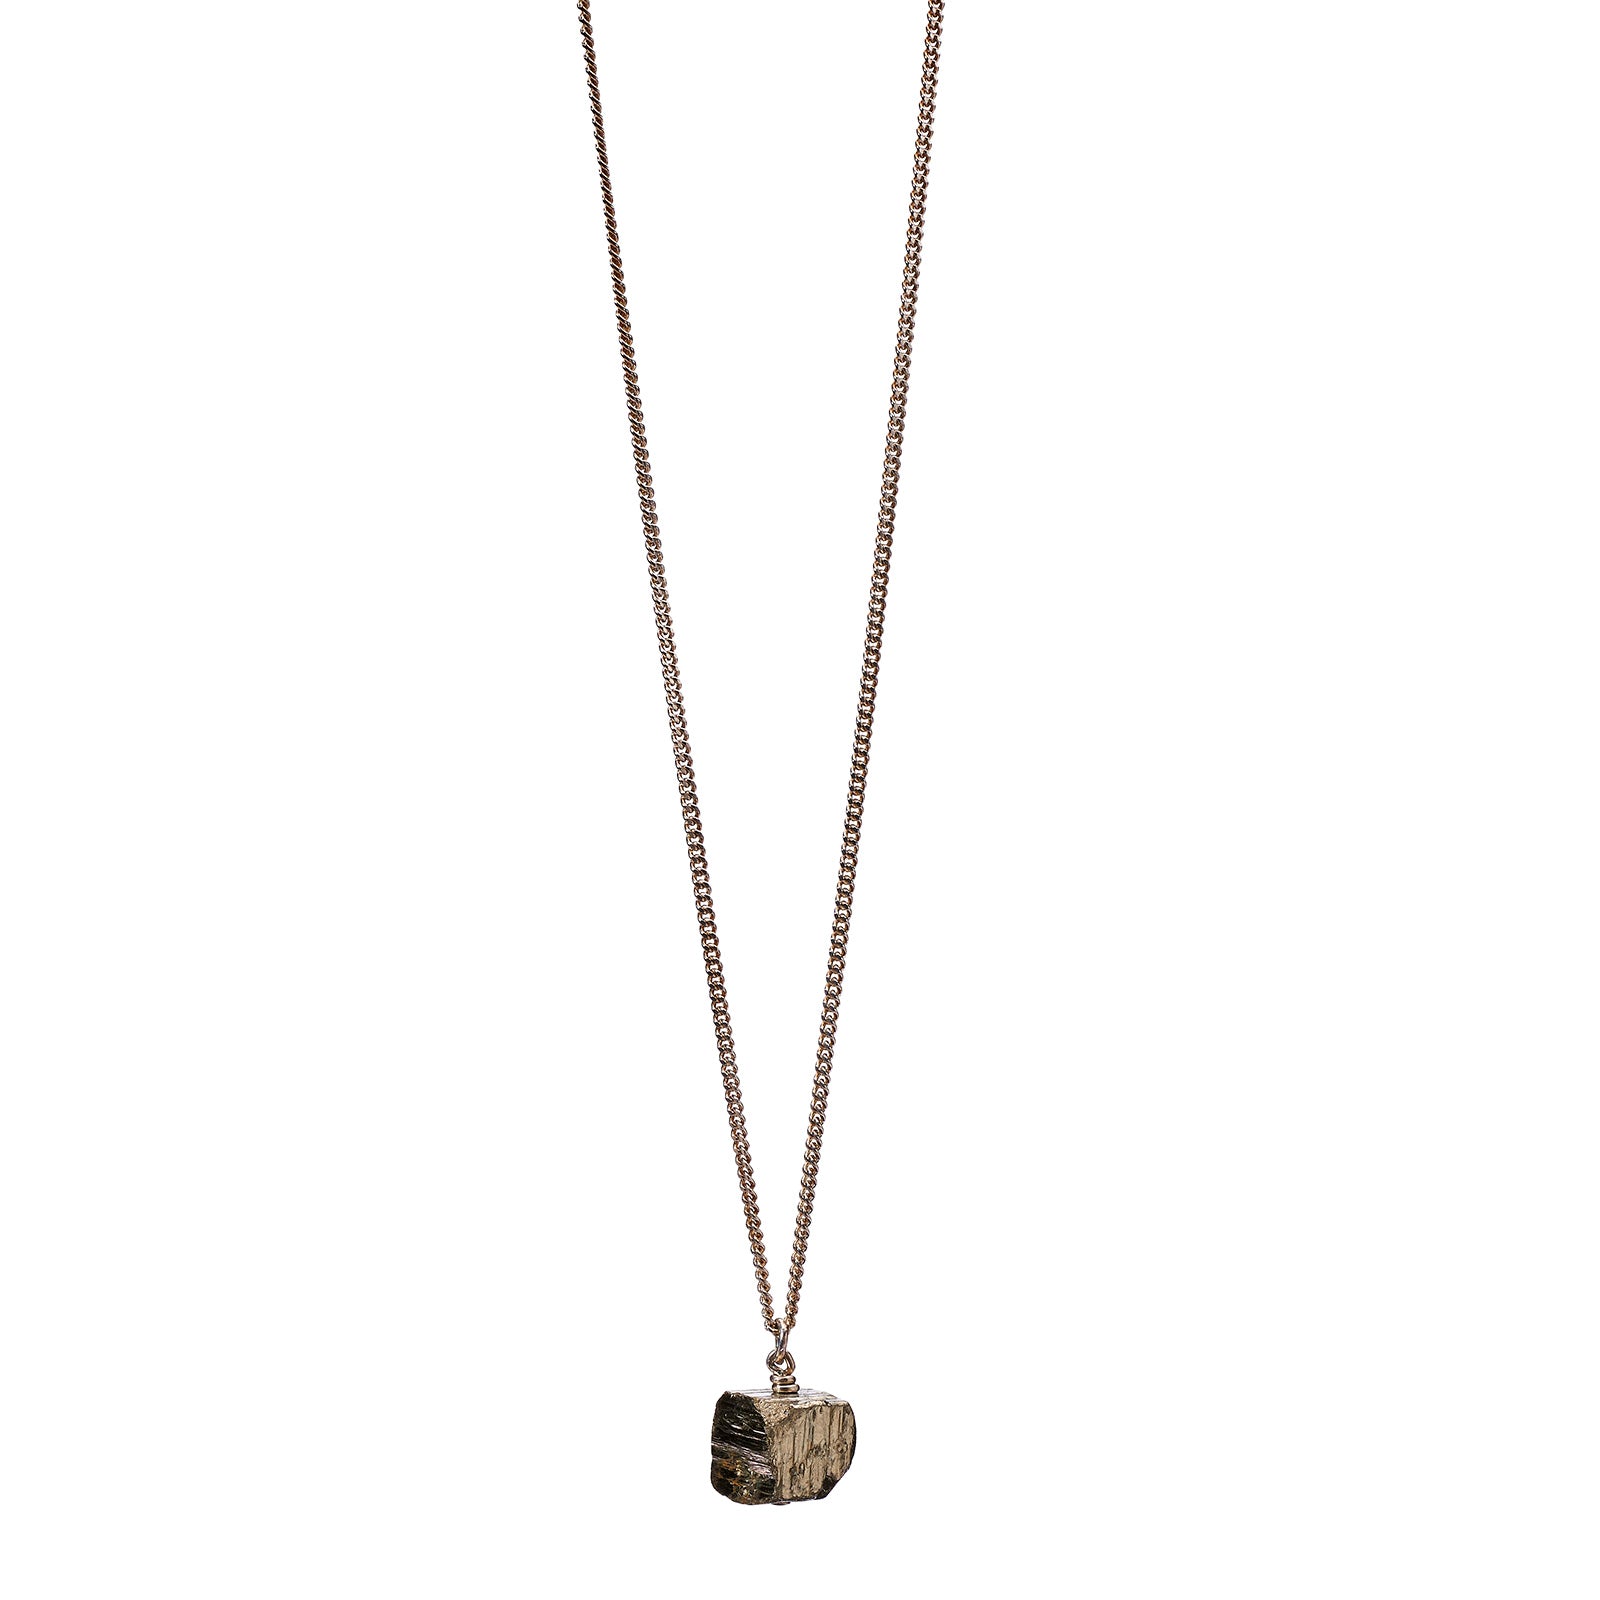 The Raw One Shiny Pyrite Necklace